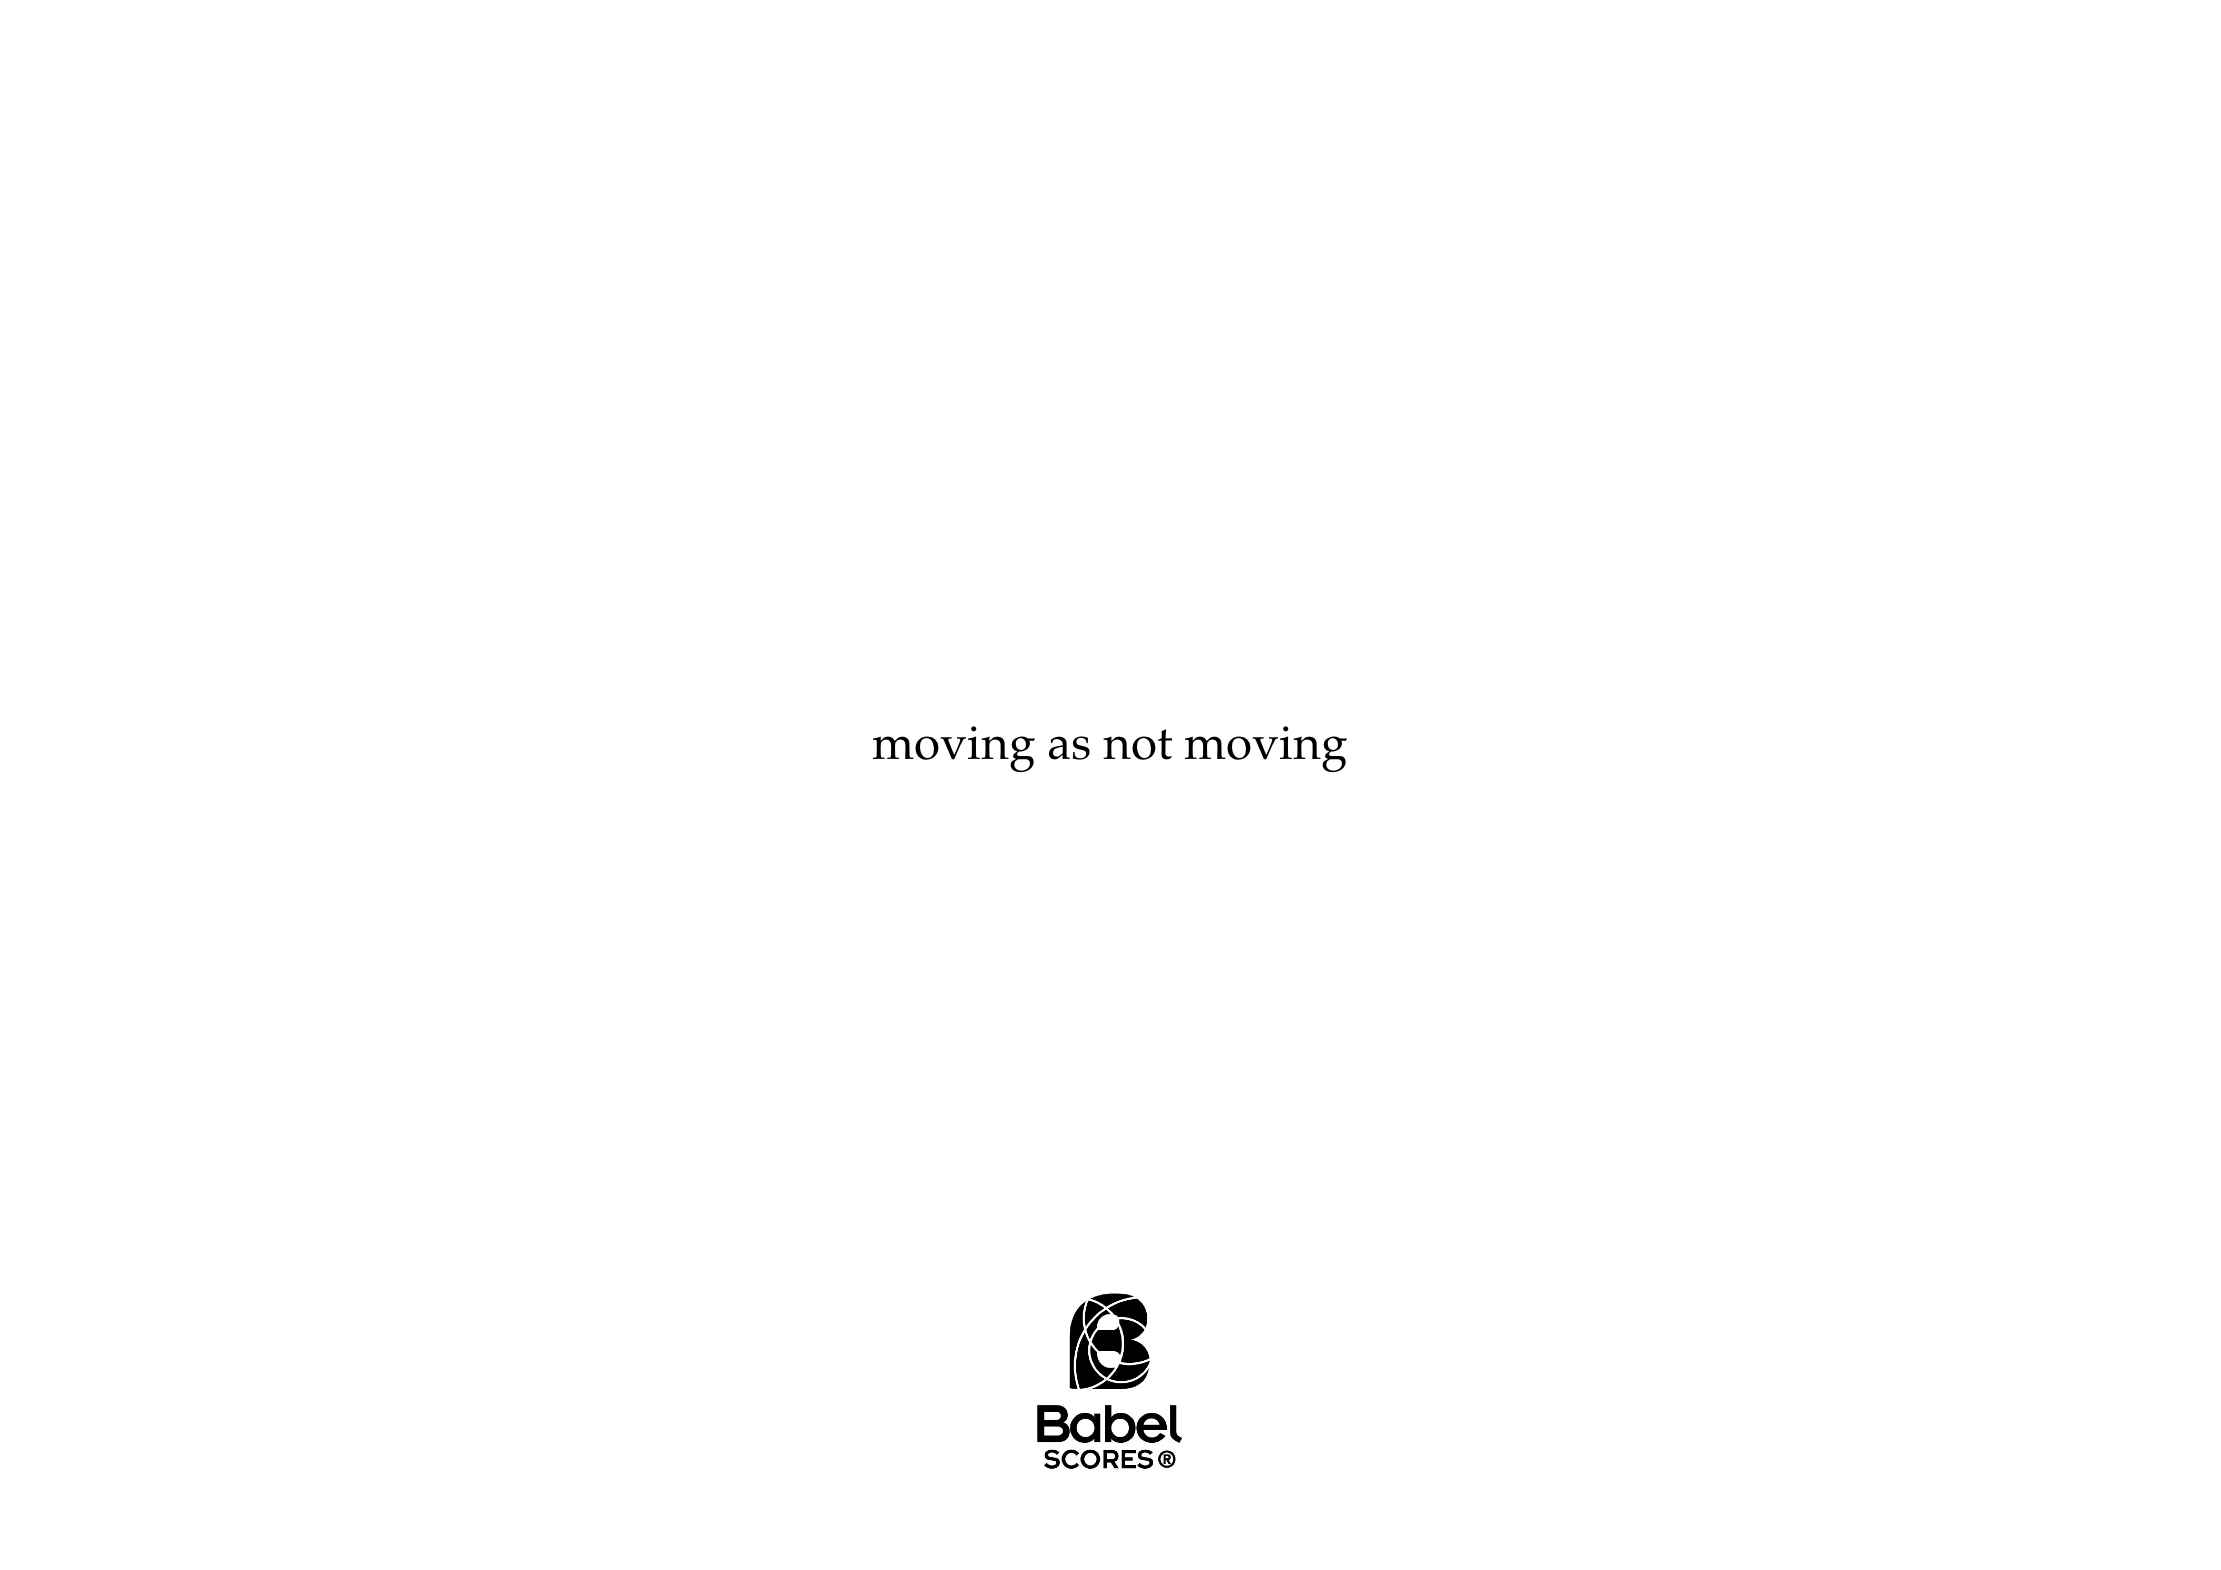 Moving_as_not_moving_END z